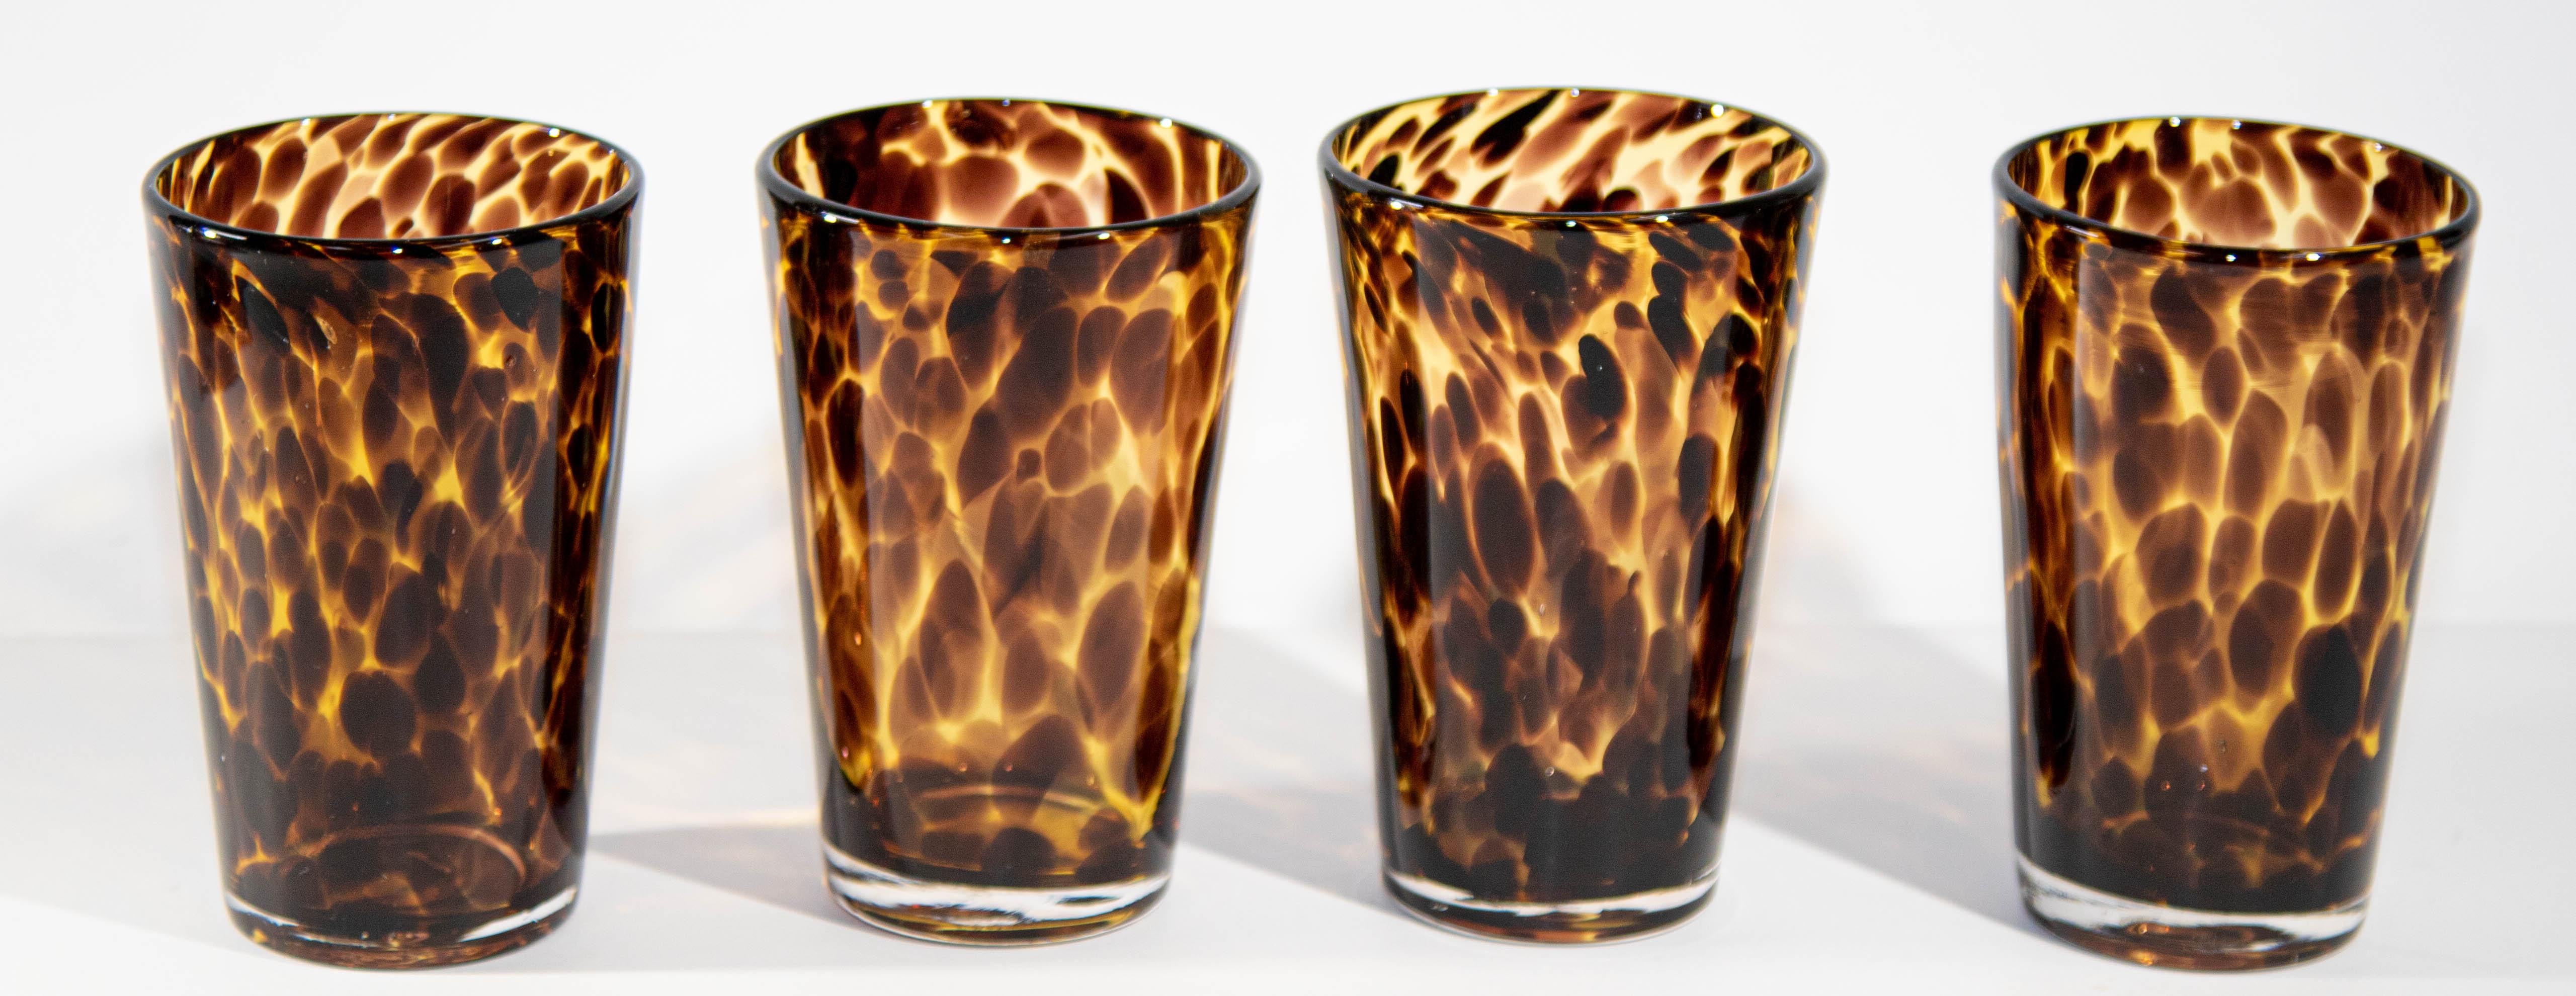 Hand-Crafted Vintage Highball Tumbler Drinking Glasses Amber Tortoise Shell Color Set of Four